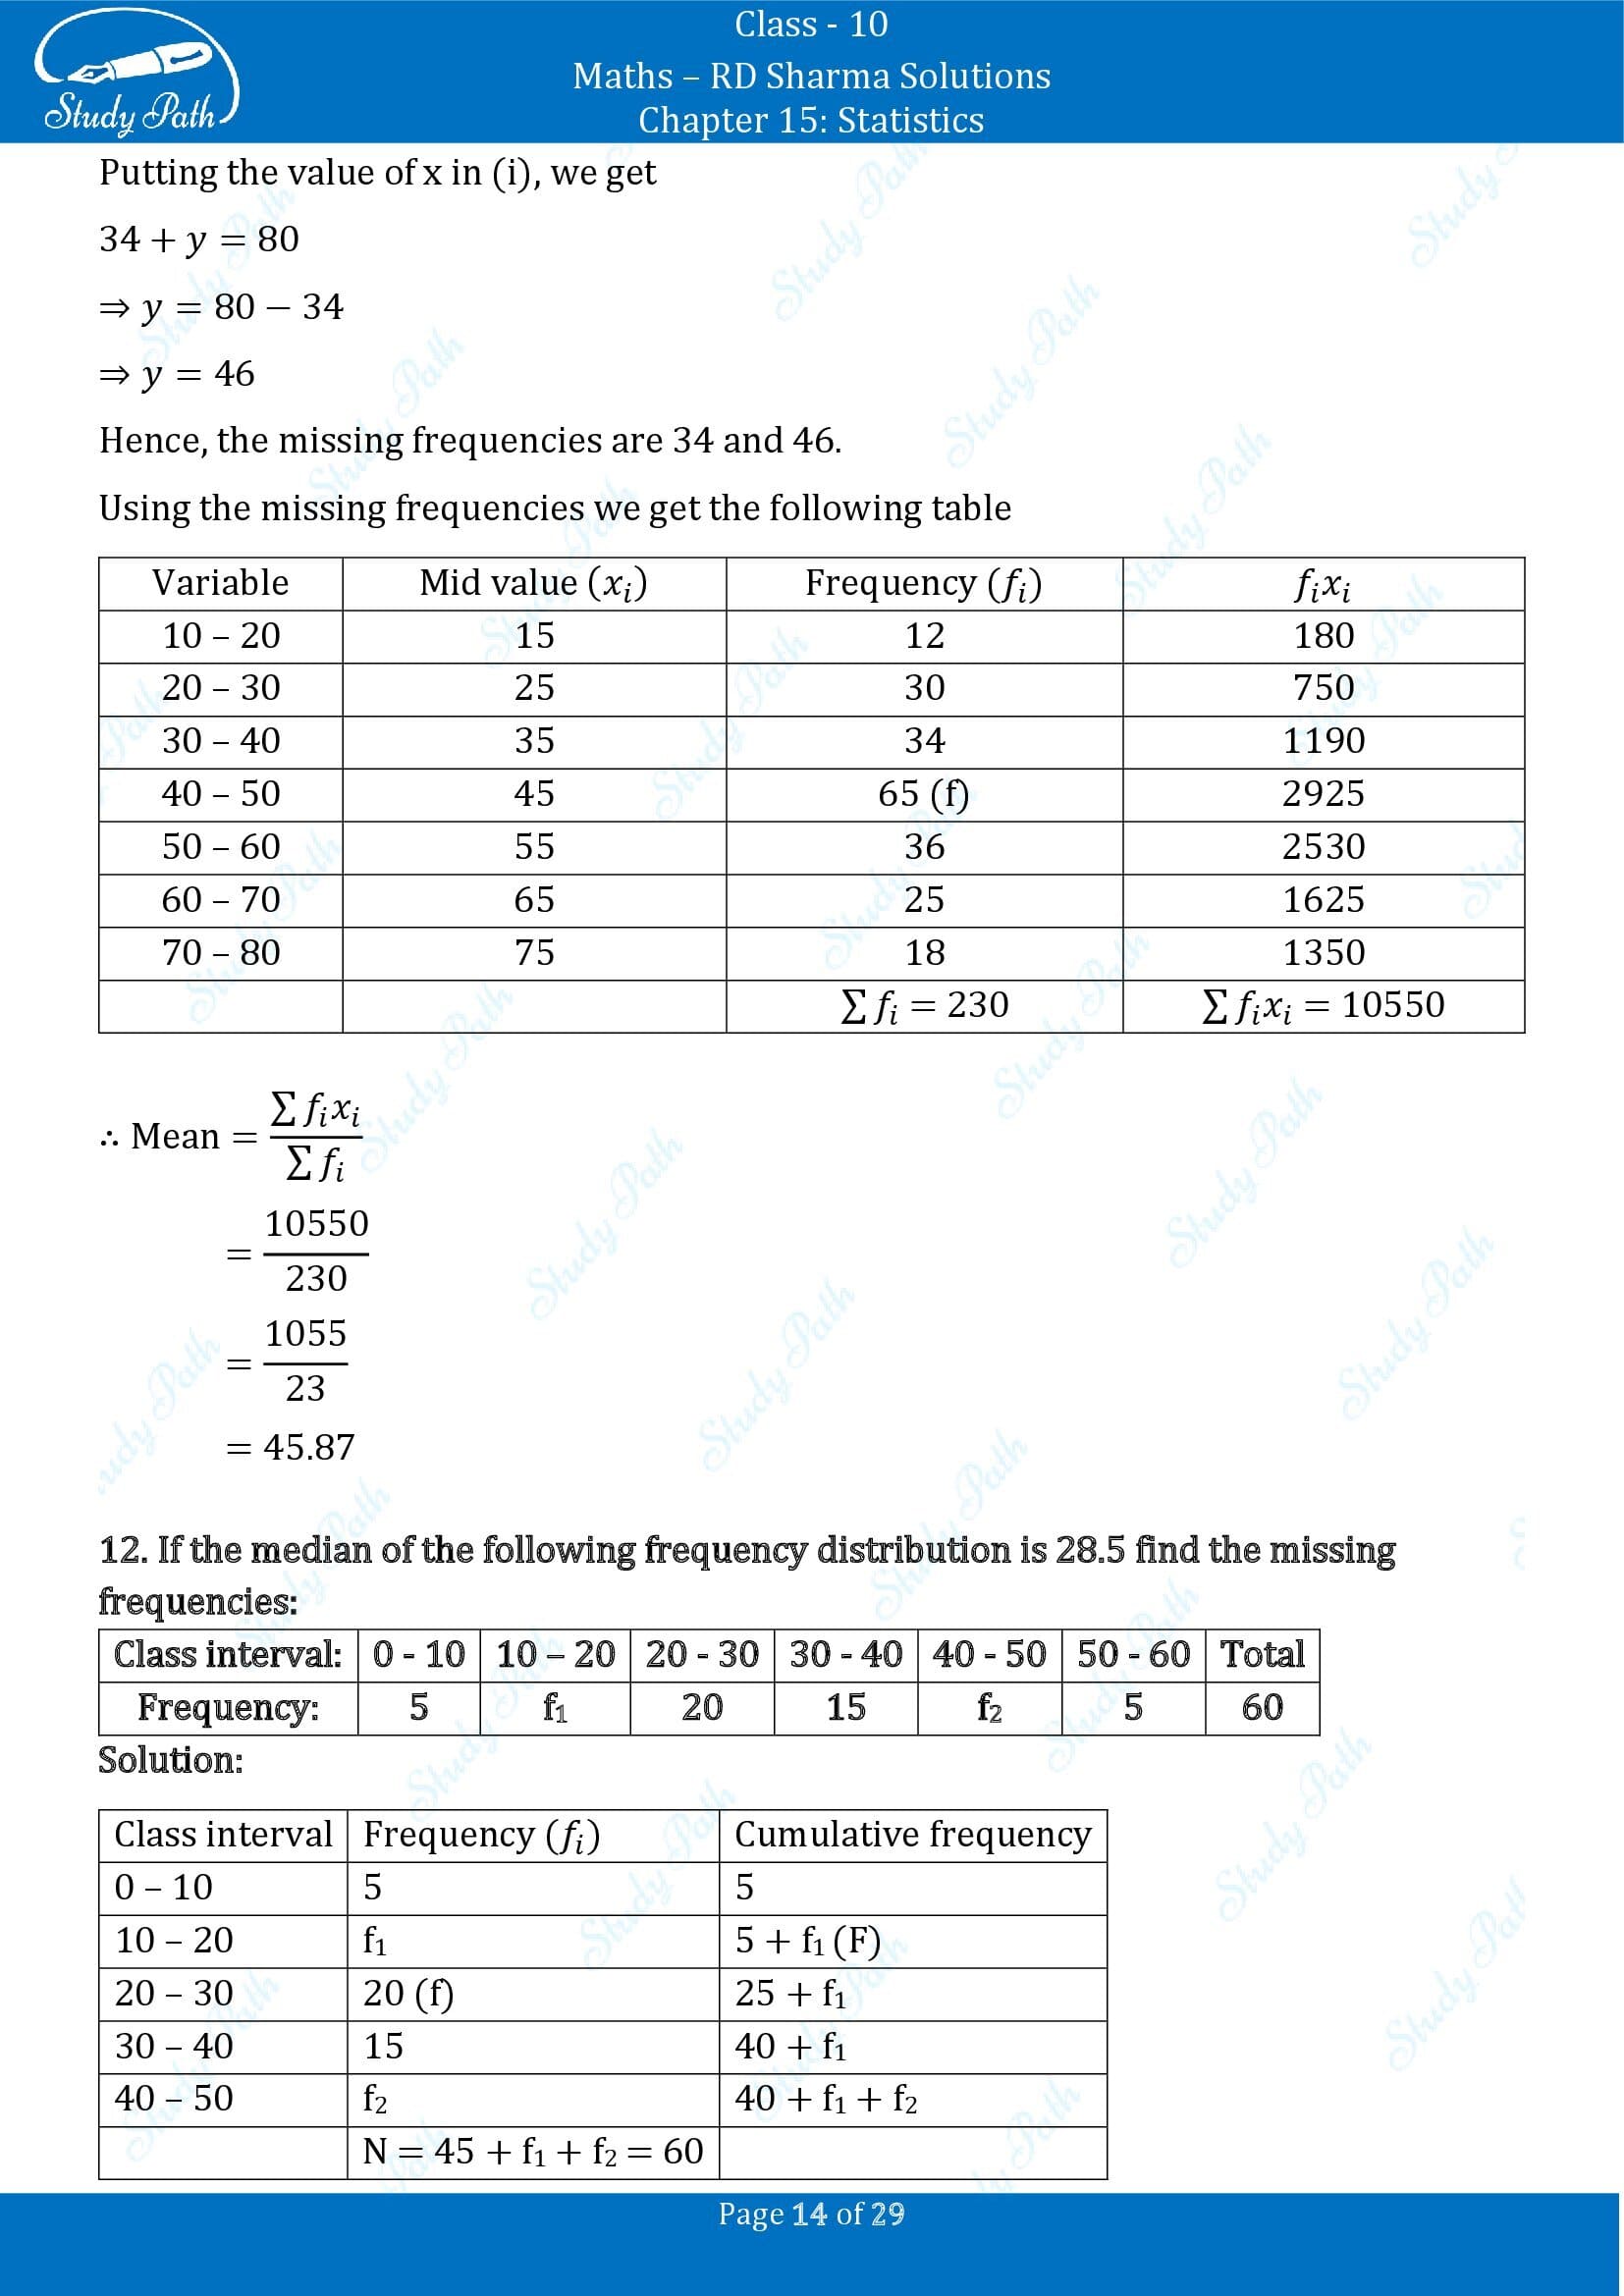 RD Sharma Solutions Class 10 Chapter 15 Statistics Exercise 15.4 00014